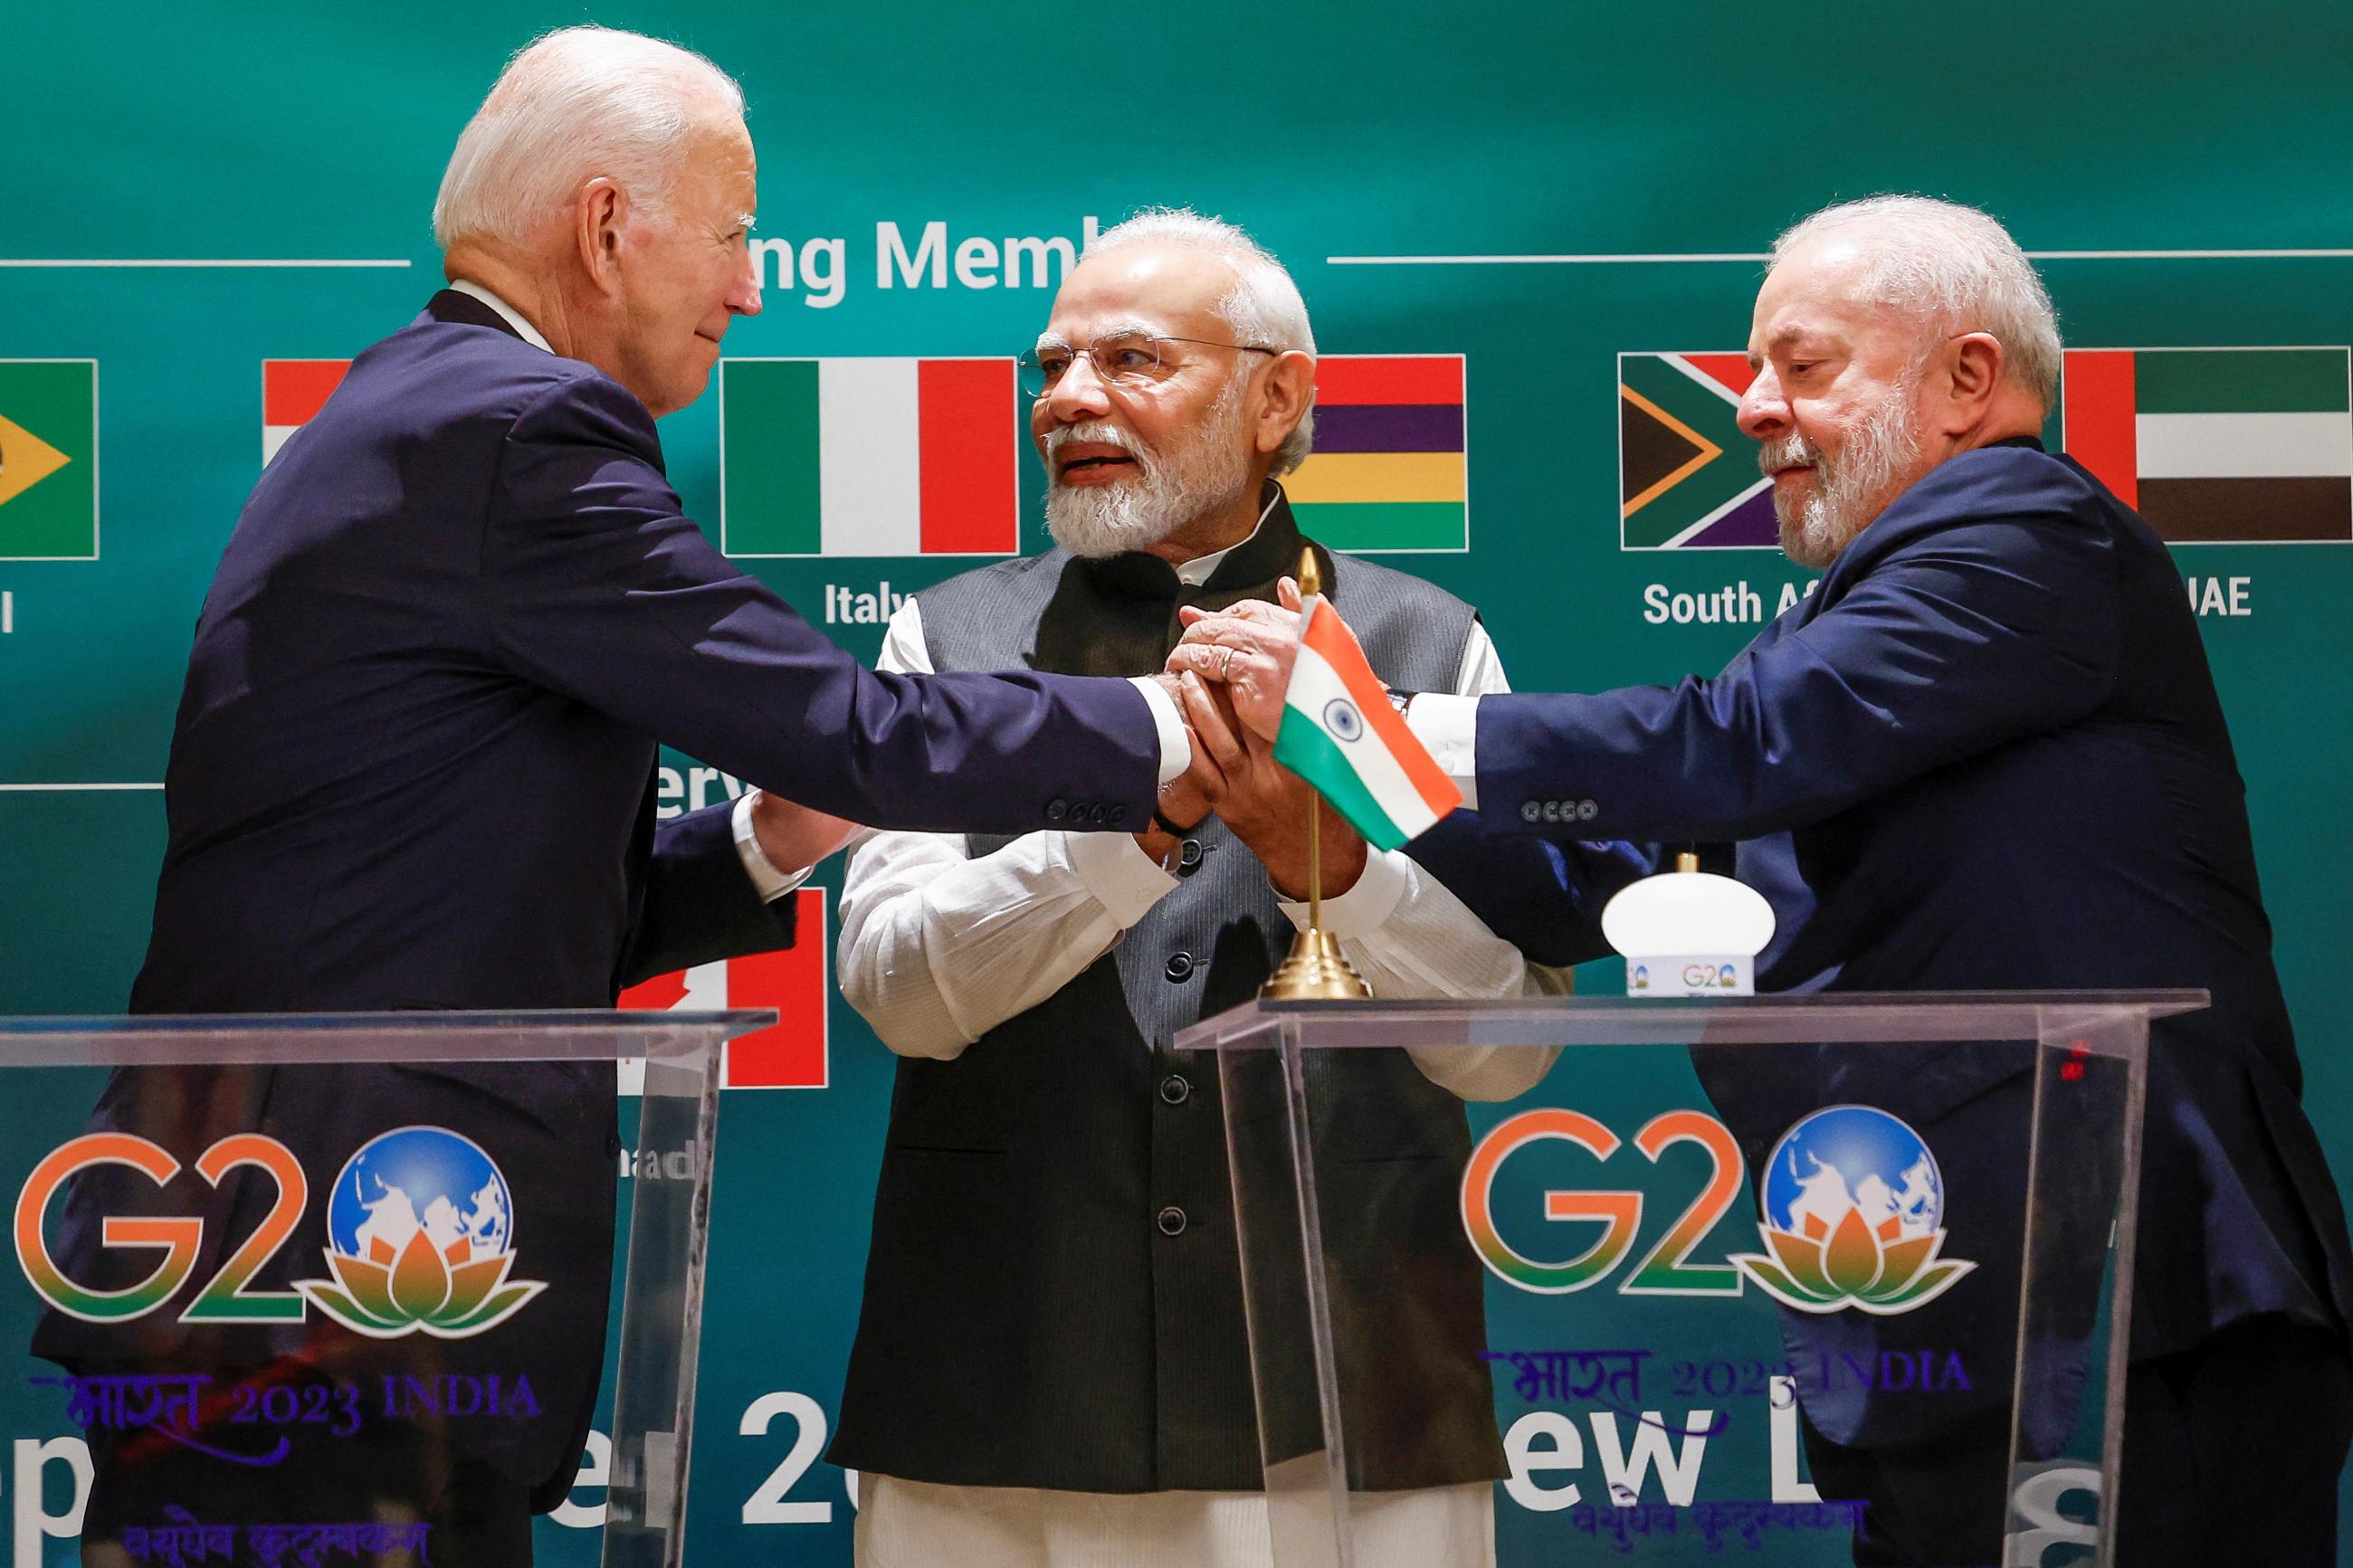 U.S. President Joe Biden, Indian Prime Minister Narendra Modi and Brazilian President Luiz Inacio Lula da Silva hold hands as they attend the launch of the Global Biofuels Alliance at the G20 summit in New Delhi, India, September 9, 2023. 